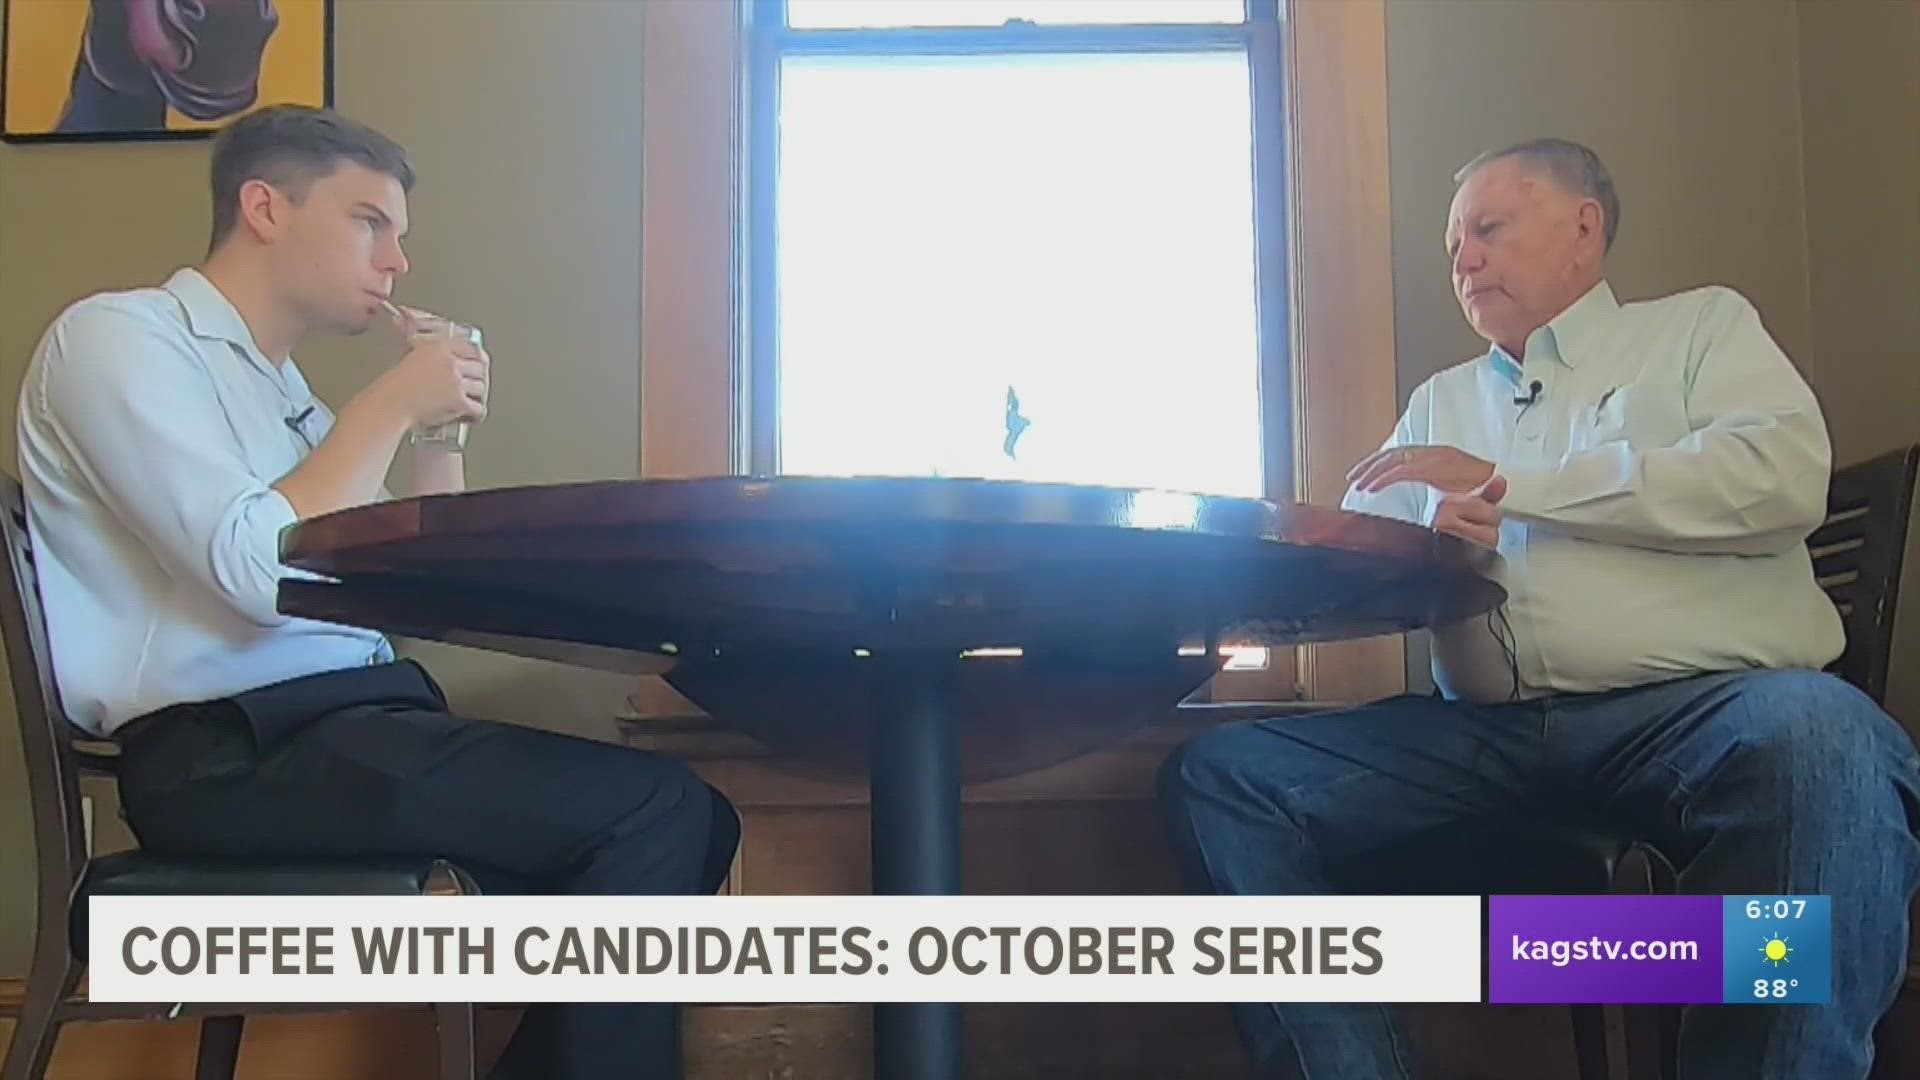 Throughout October, KAGS TV's William Johnson will speak with candidates one-on-one throughout the month leading up to election season in November.